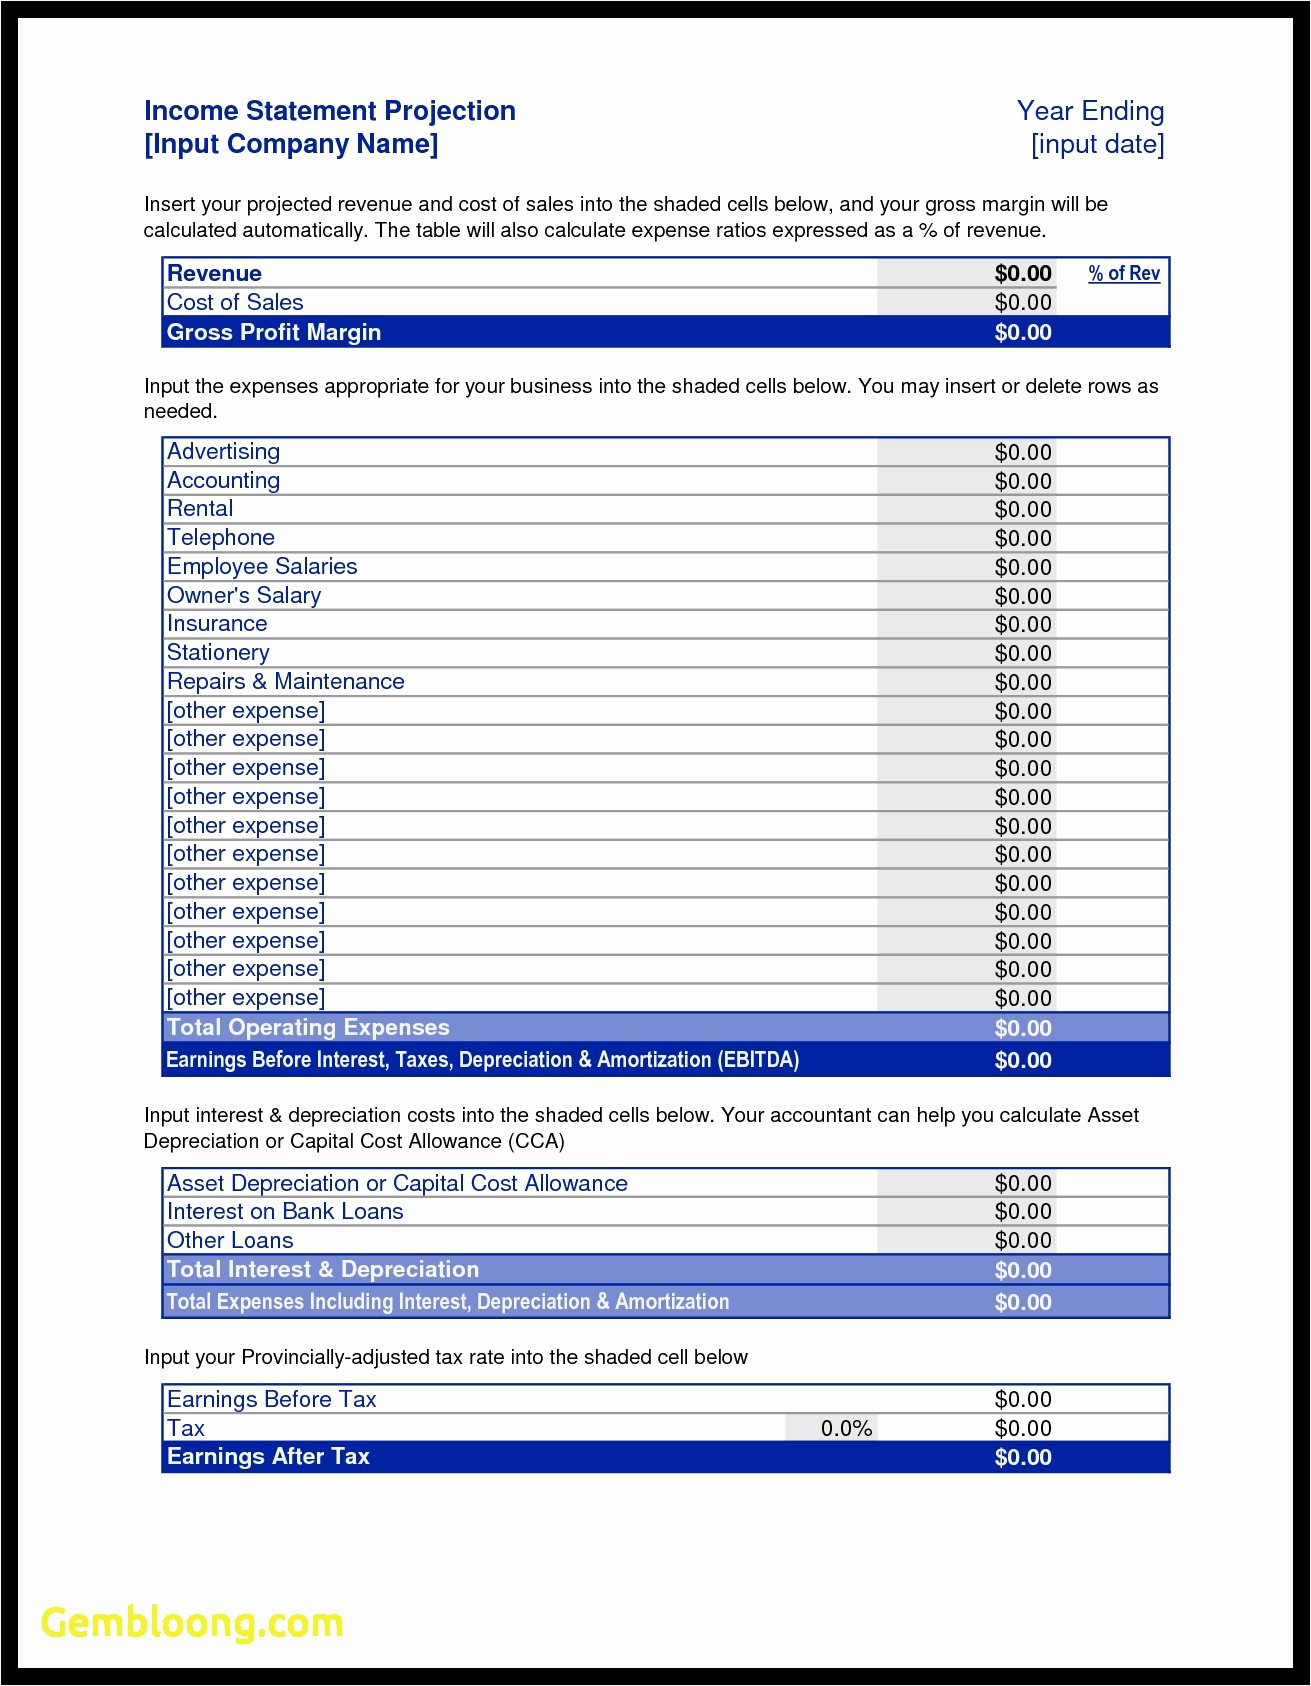 Printable Cost Basis Spreadsheet Excel Inside Cost Basis Spreadsheet Excel Printable